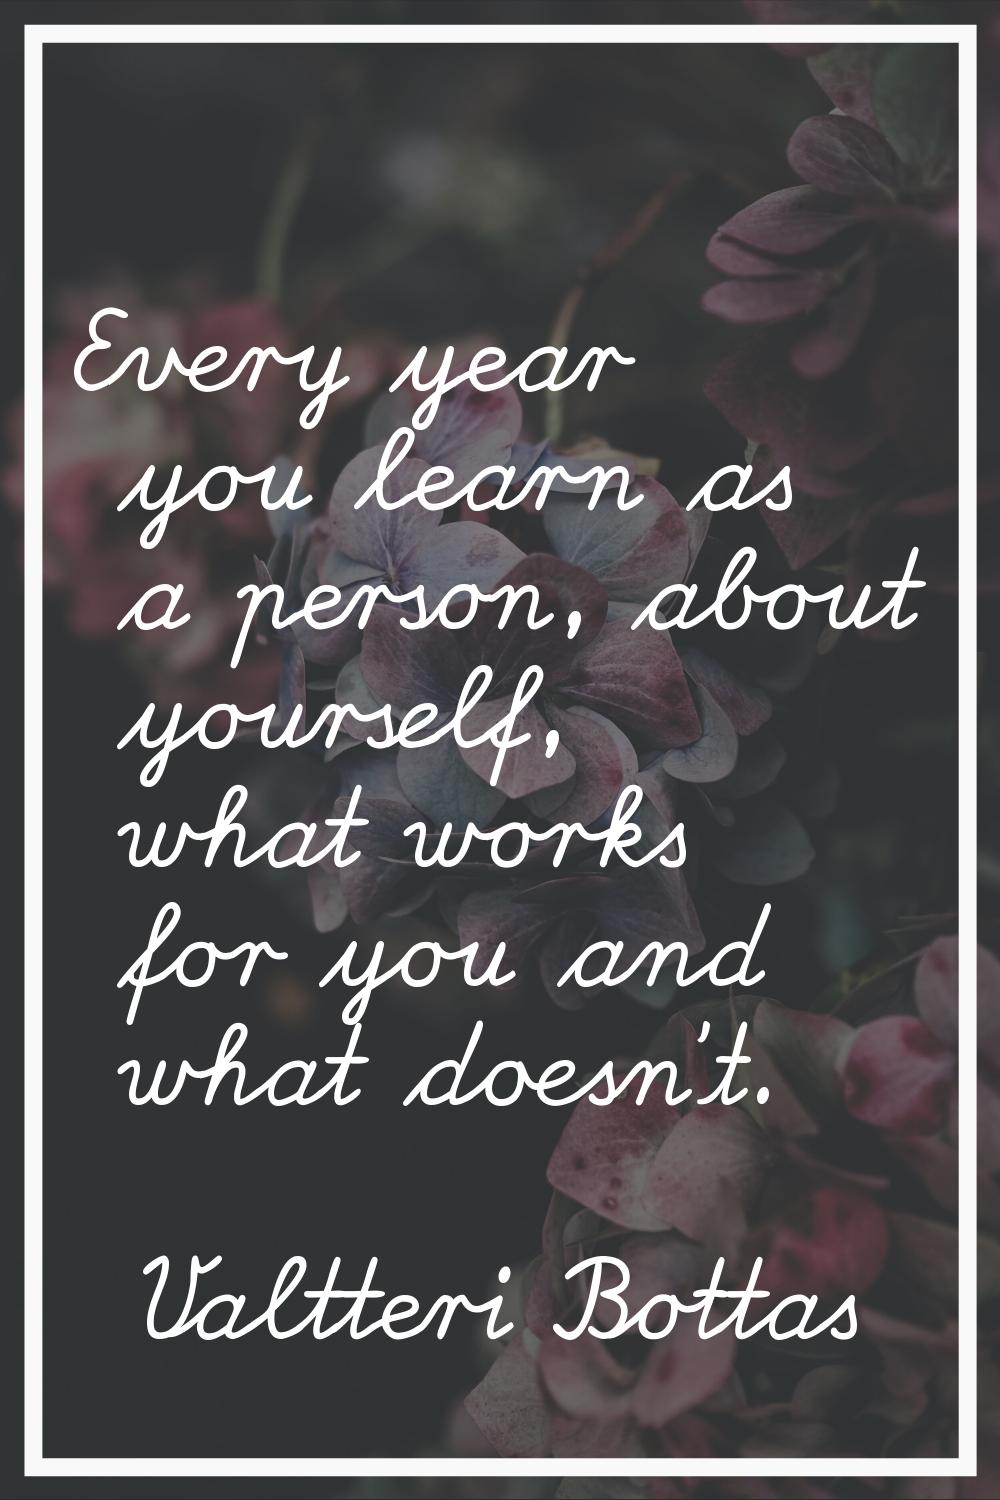 Every year you learn as a person, about yourself, what works for you and what doesn't.